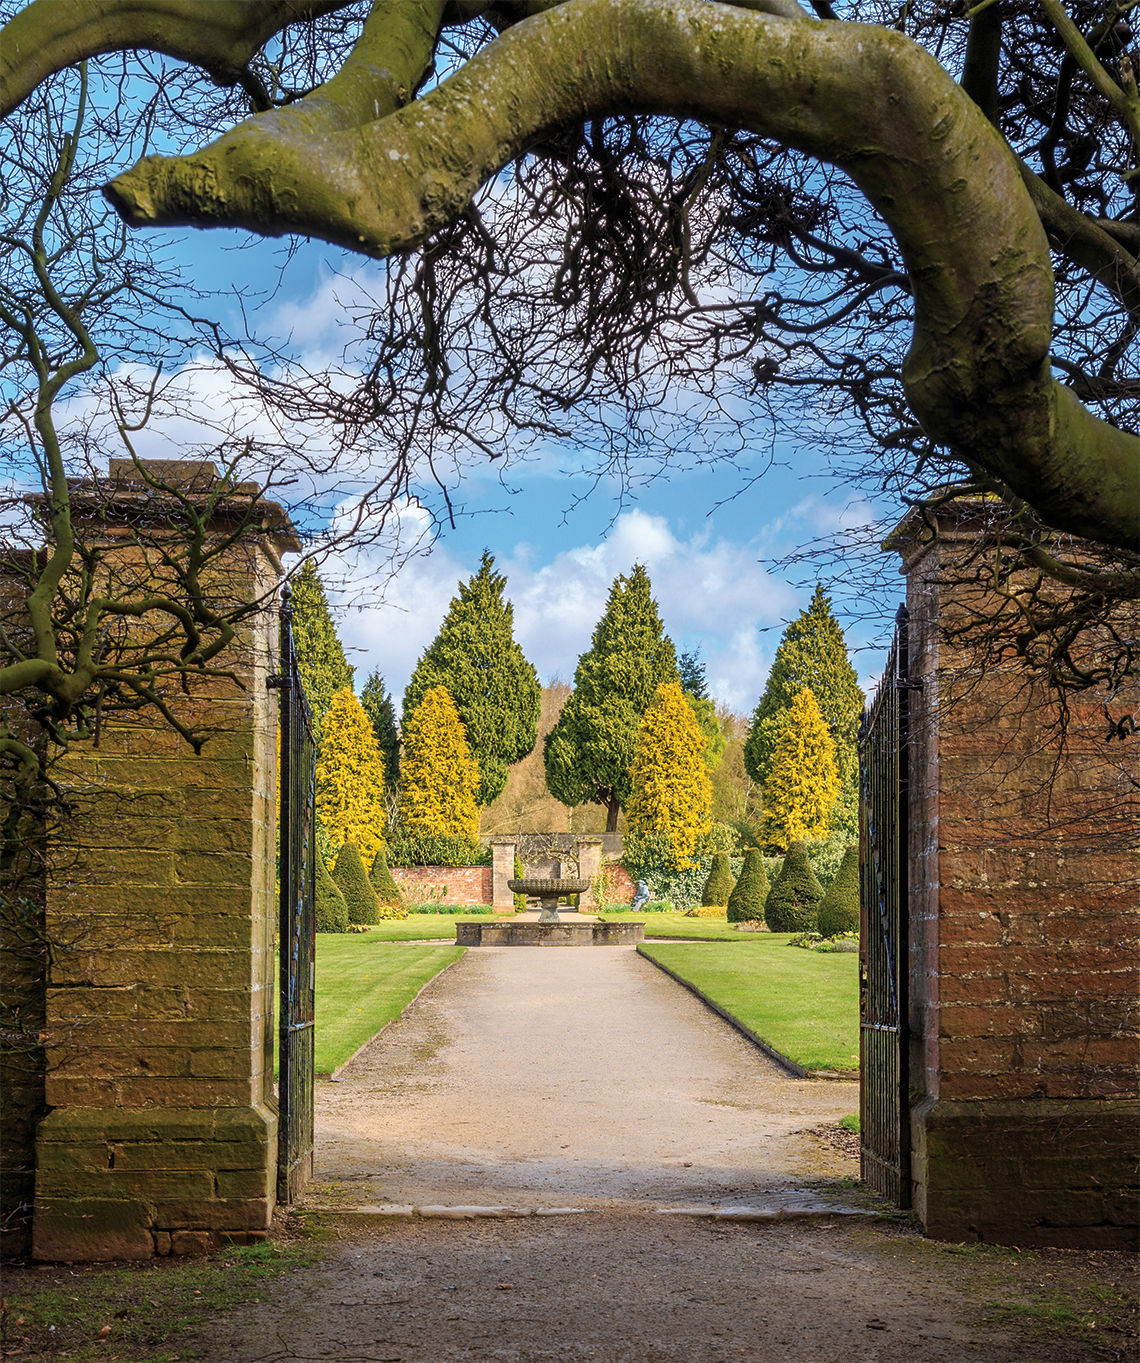 Entrance gate to the rose gardens at Newstead Abbey. Photography: Shutterstock / Jason Batterham.